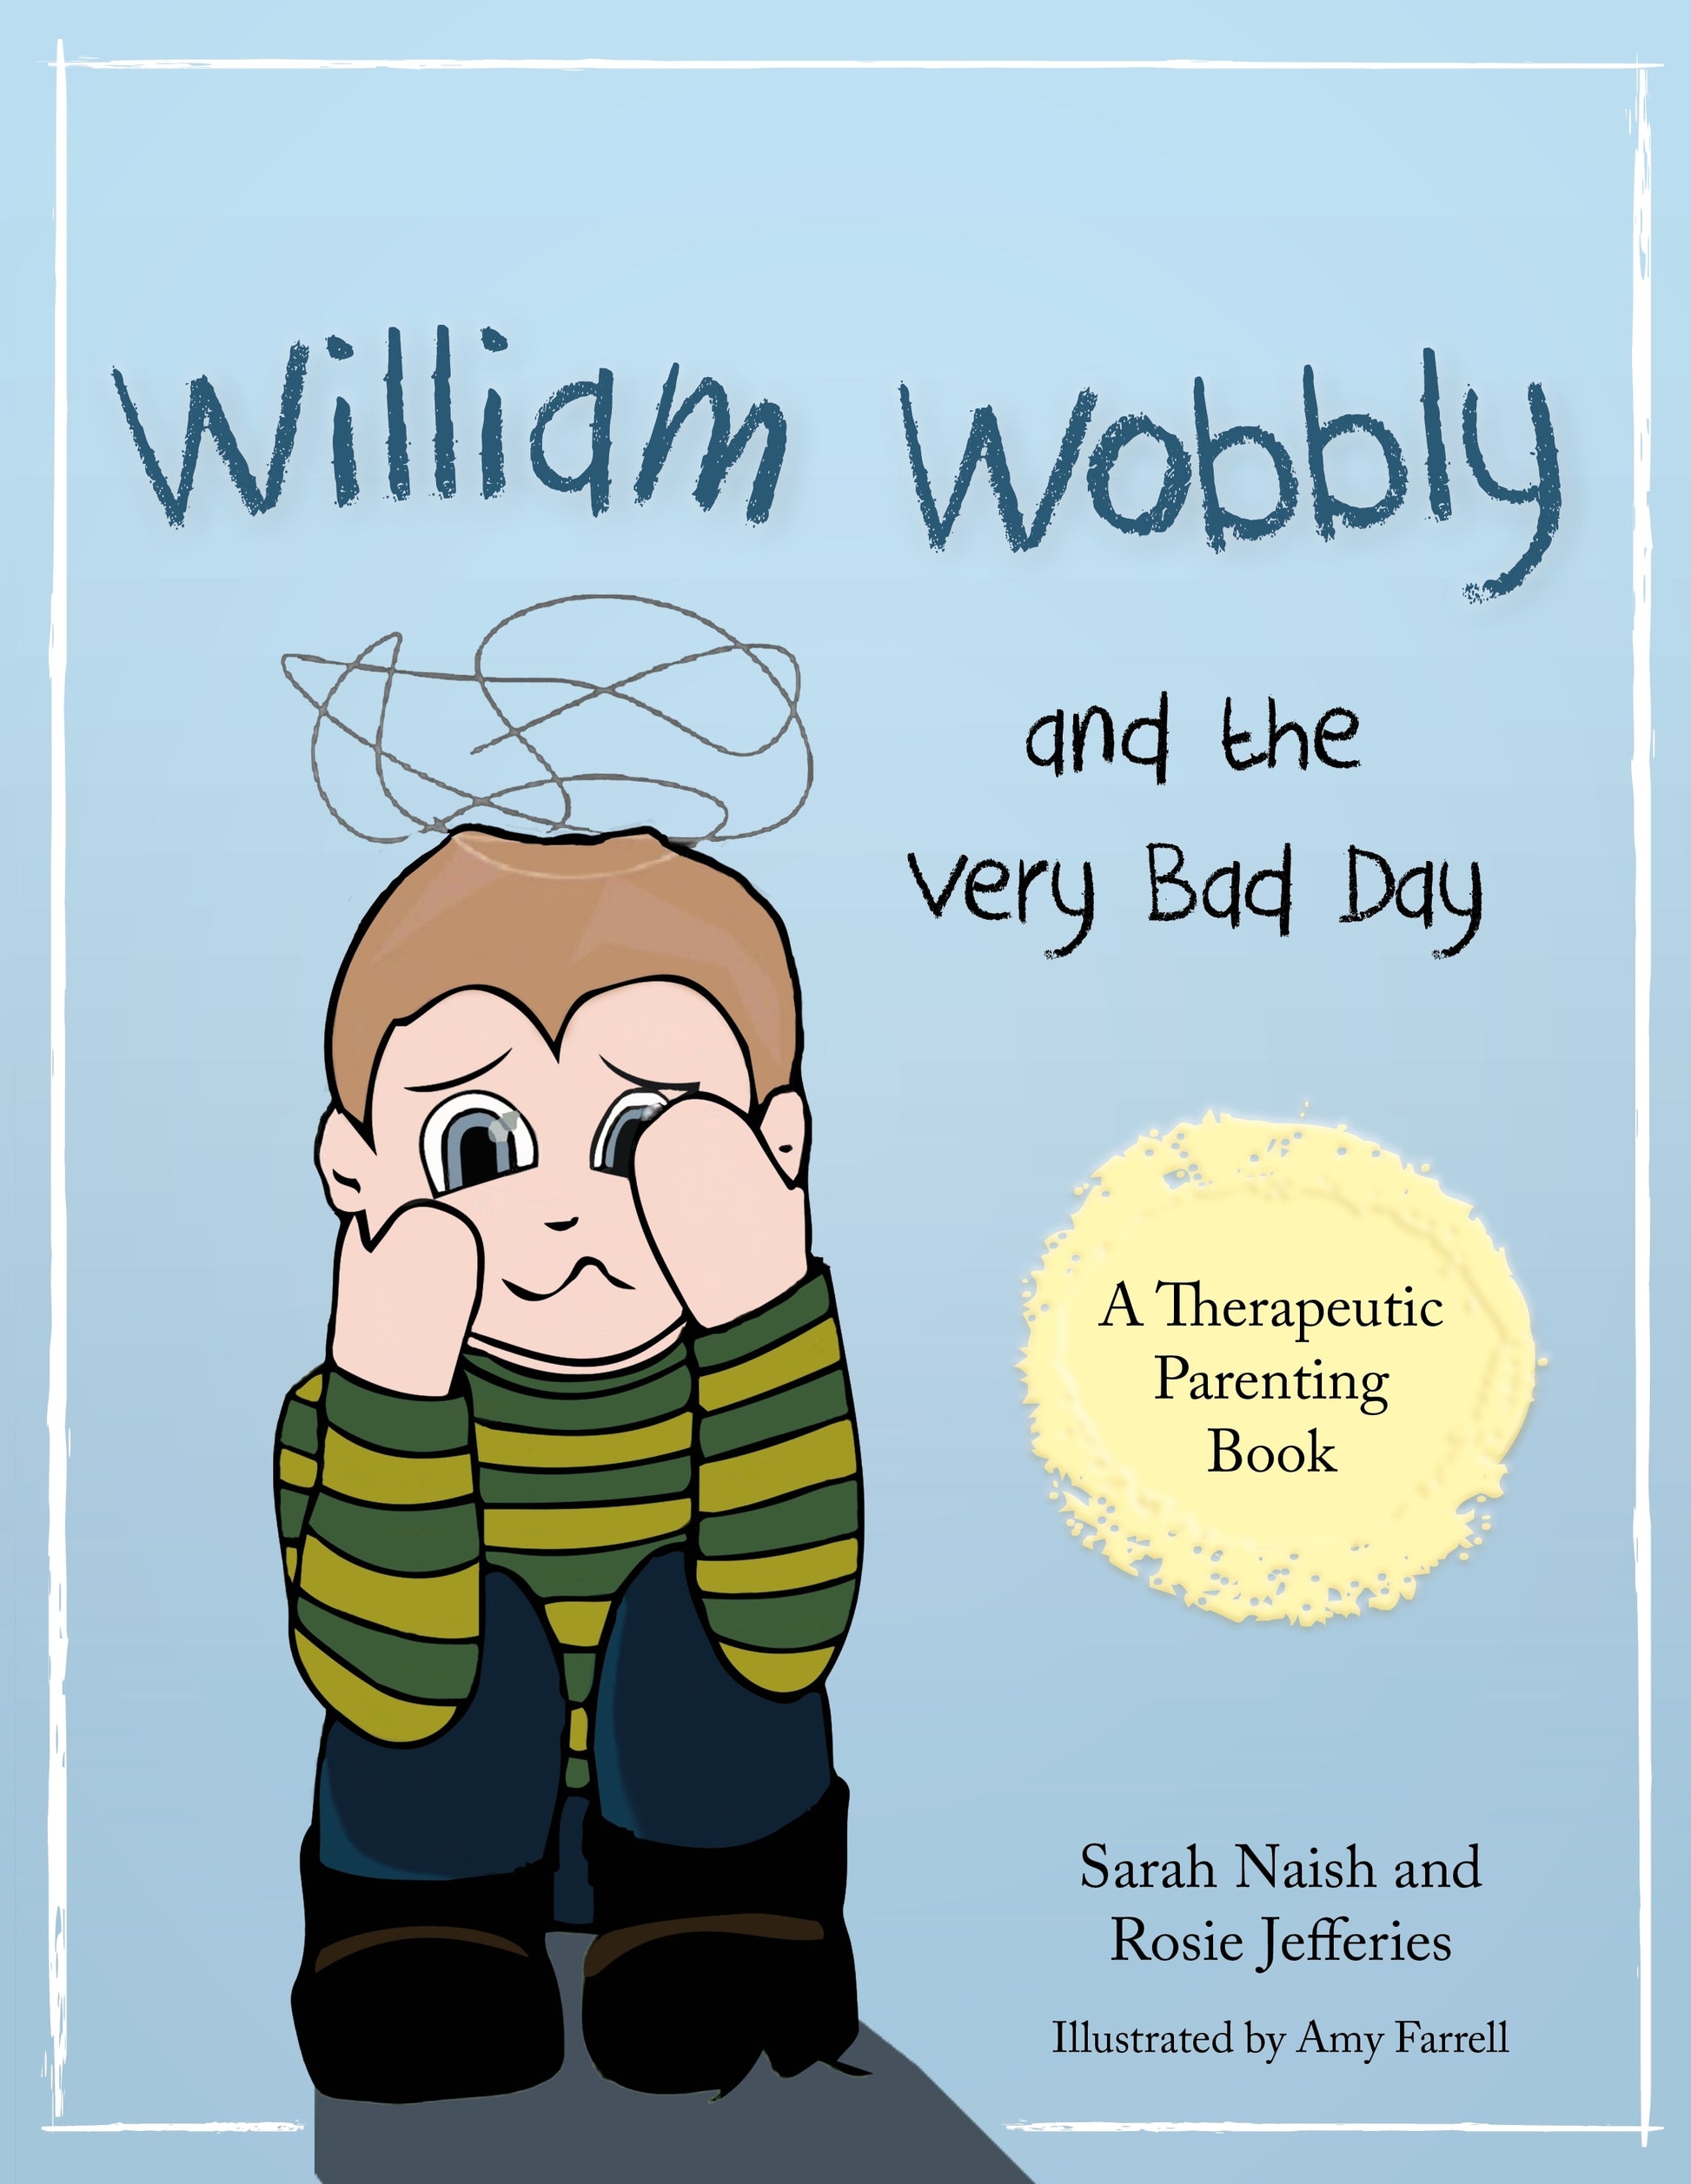 William Wobbly and the Very Bad Day by Sarah Naish, Rosie Jefferies, Amy Farrell